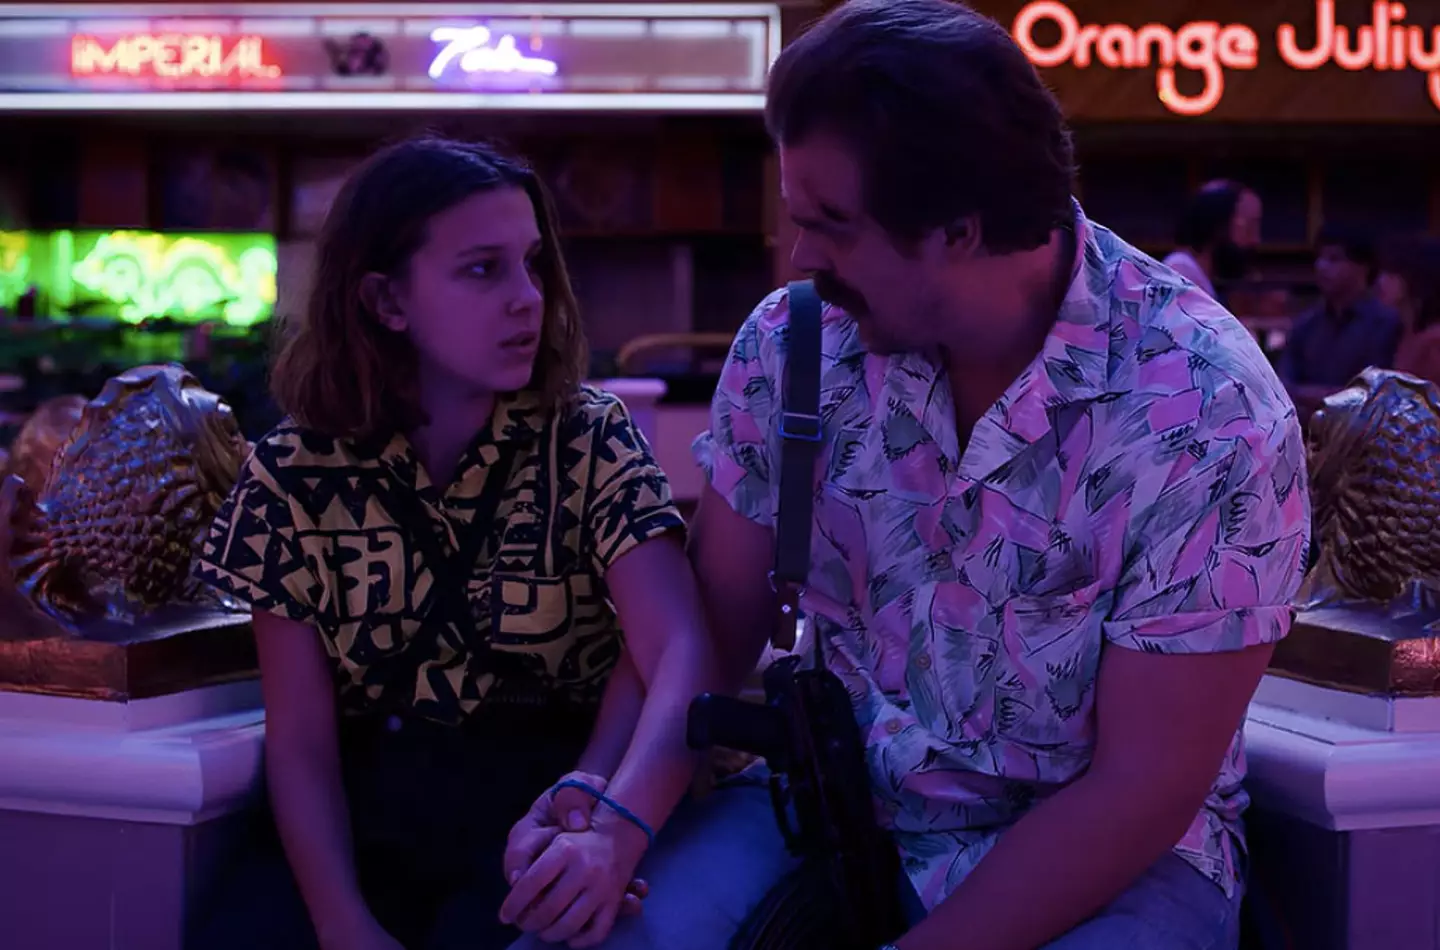 Harbour said the Stranger Things cast aren't getting the childhood he wishes they could.